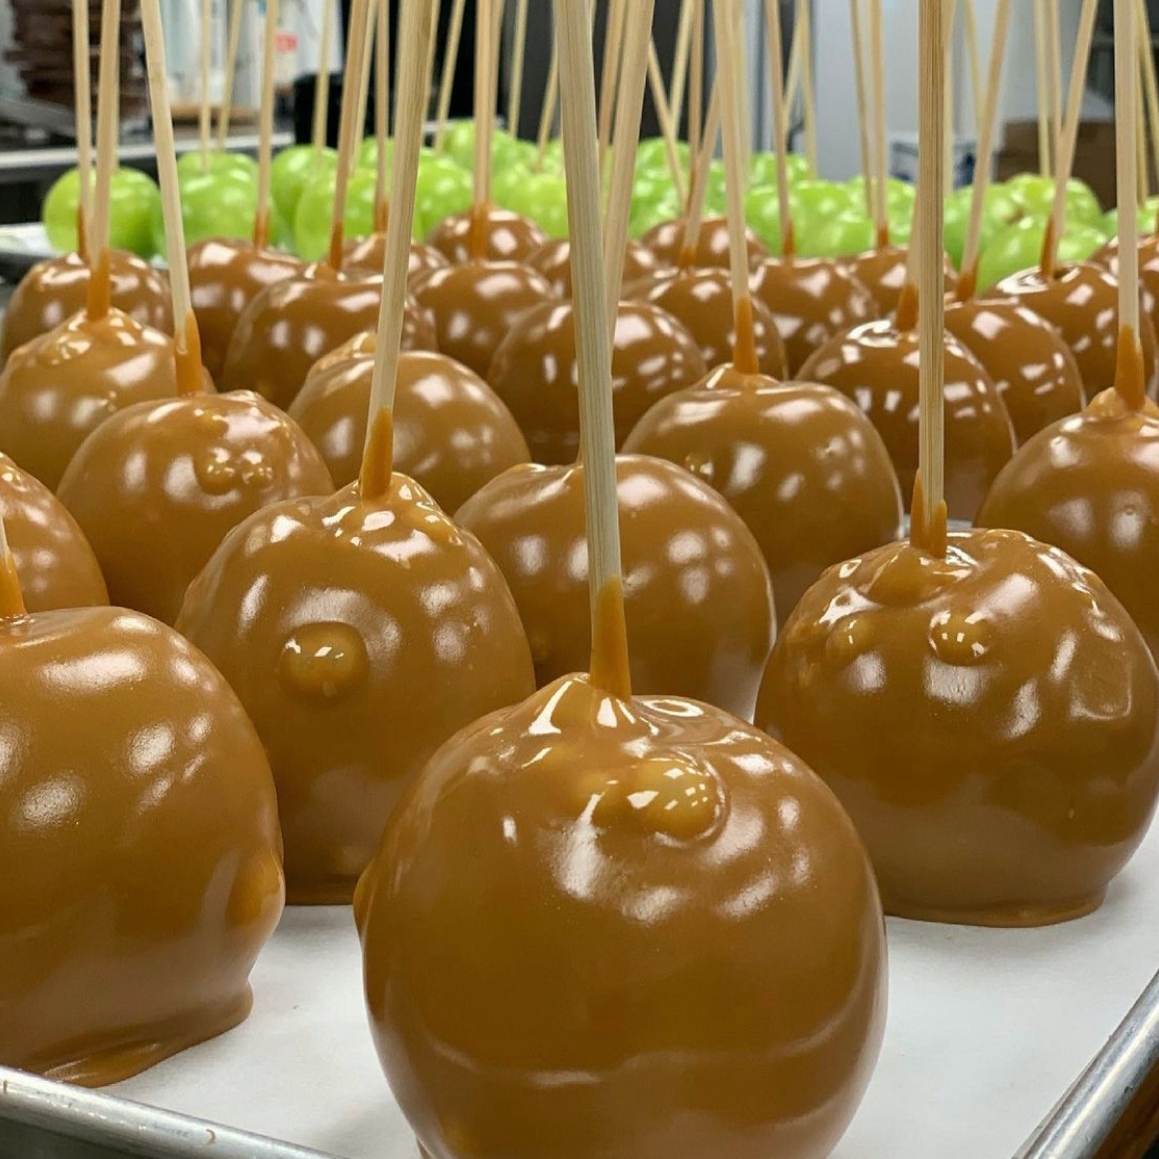 A tray of caramel-dipped apples from Bon Bon's Candy House